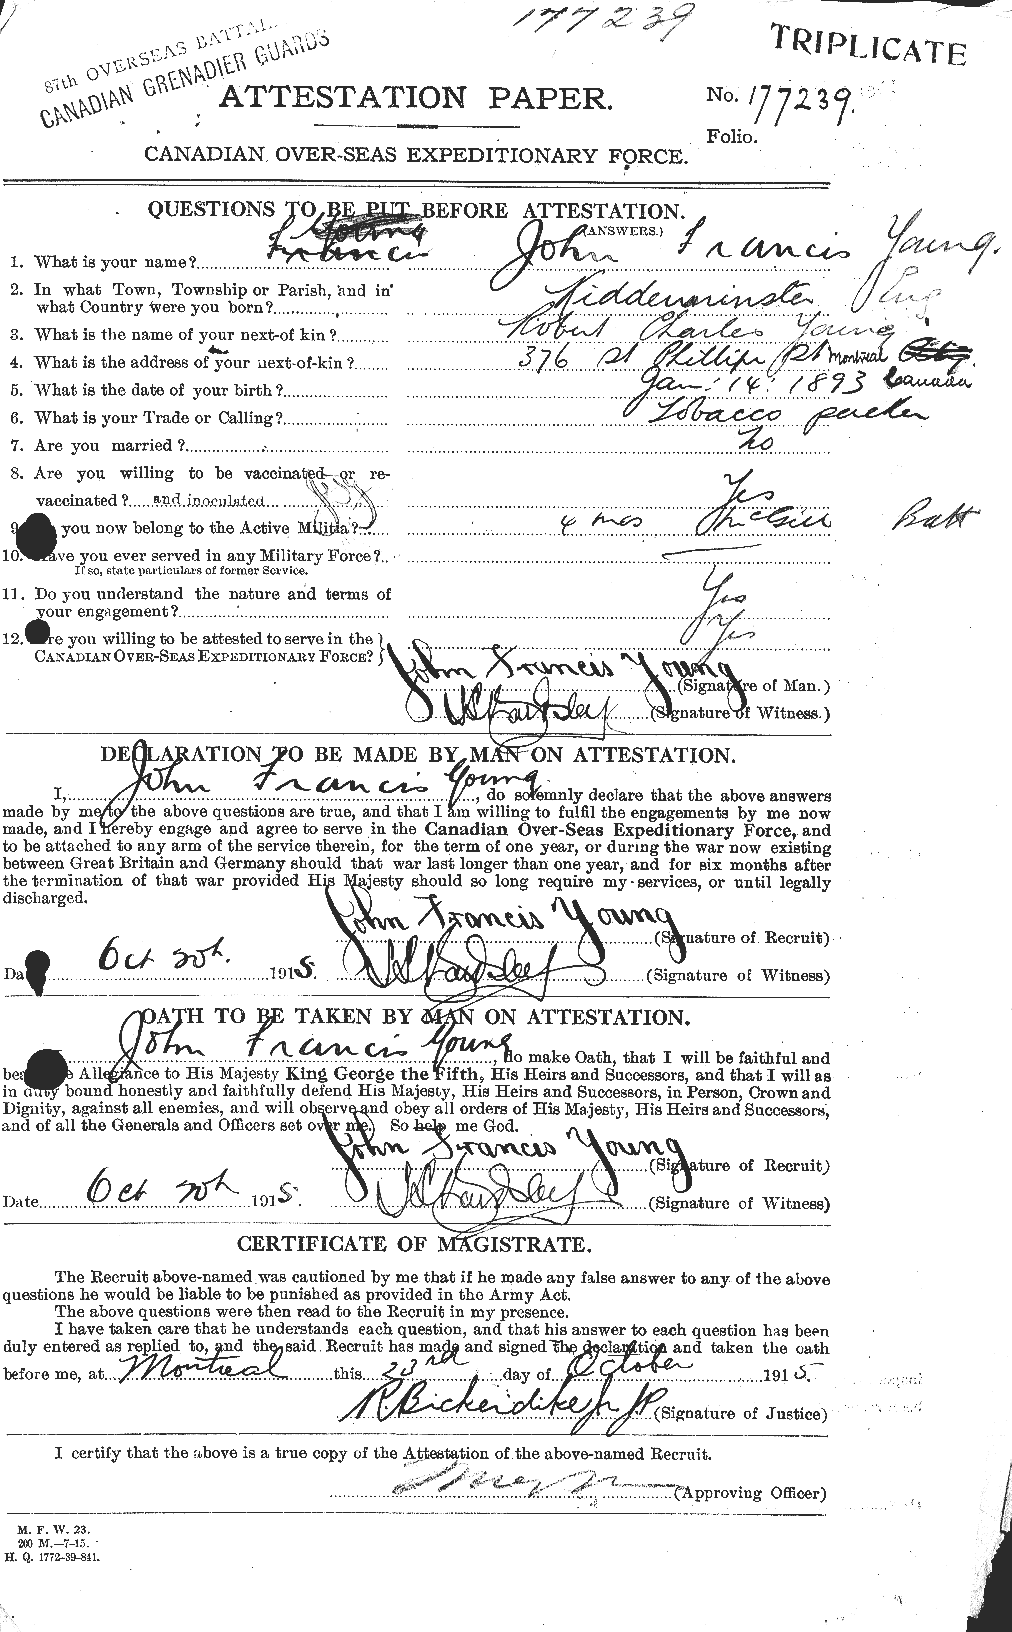 Personnel Records of the First World War - CEF 690754a